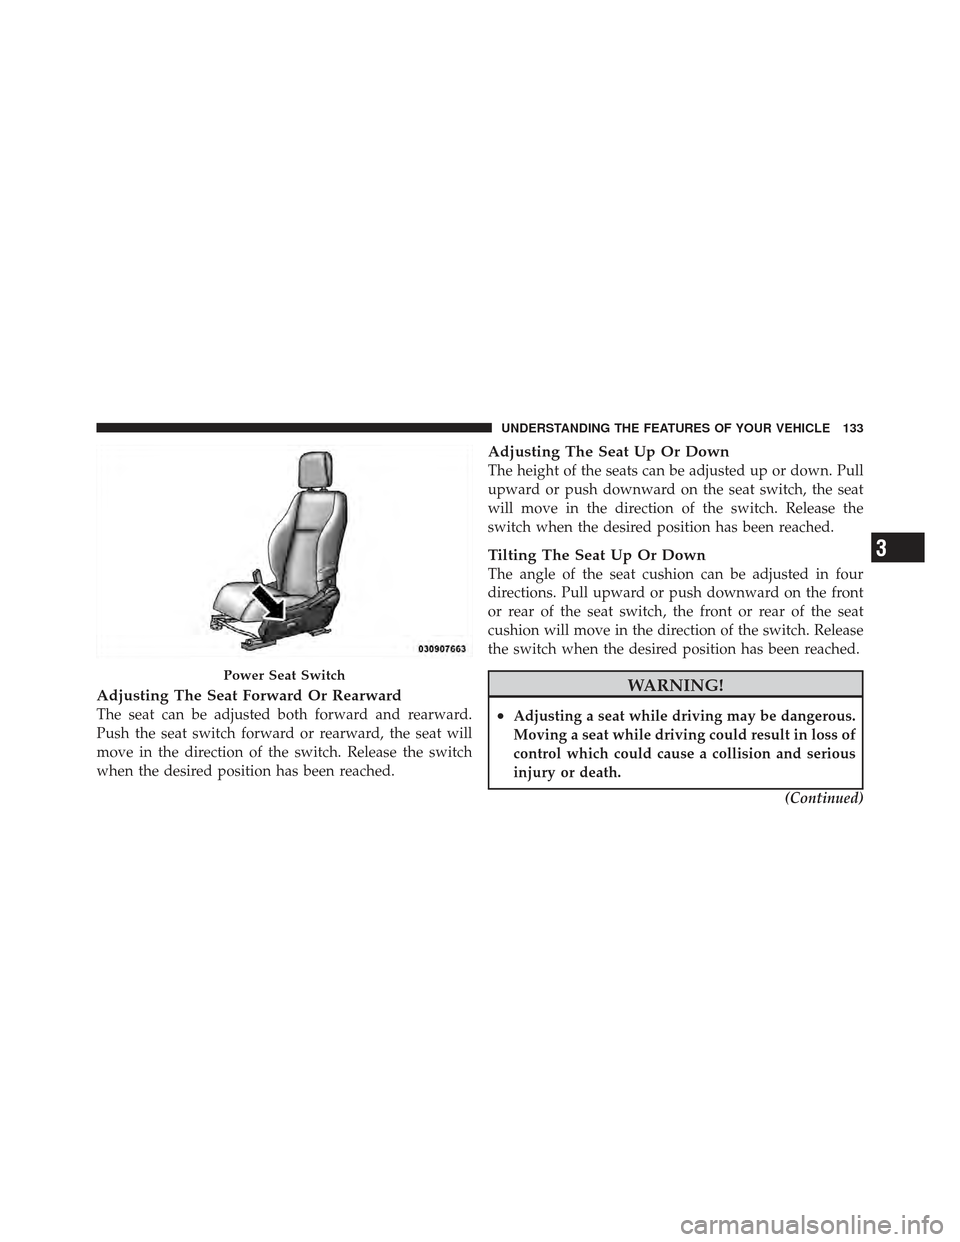 DODGE CALIBER 2011 1.G Service Manual Adjusting The Seat Forward Or Rearward
The seat can be adjusted both forward and rearward.
Push the seat switch forward or rearward, the seat will
move in the direction of the switch. Release the swit